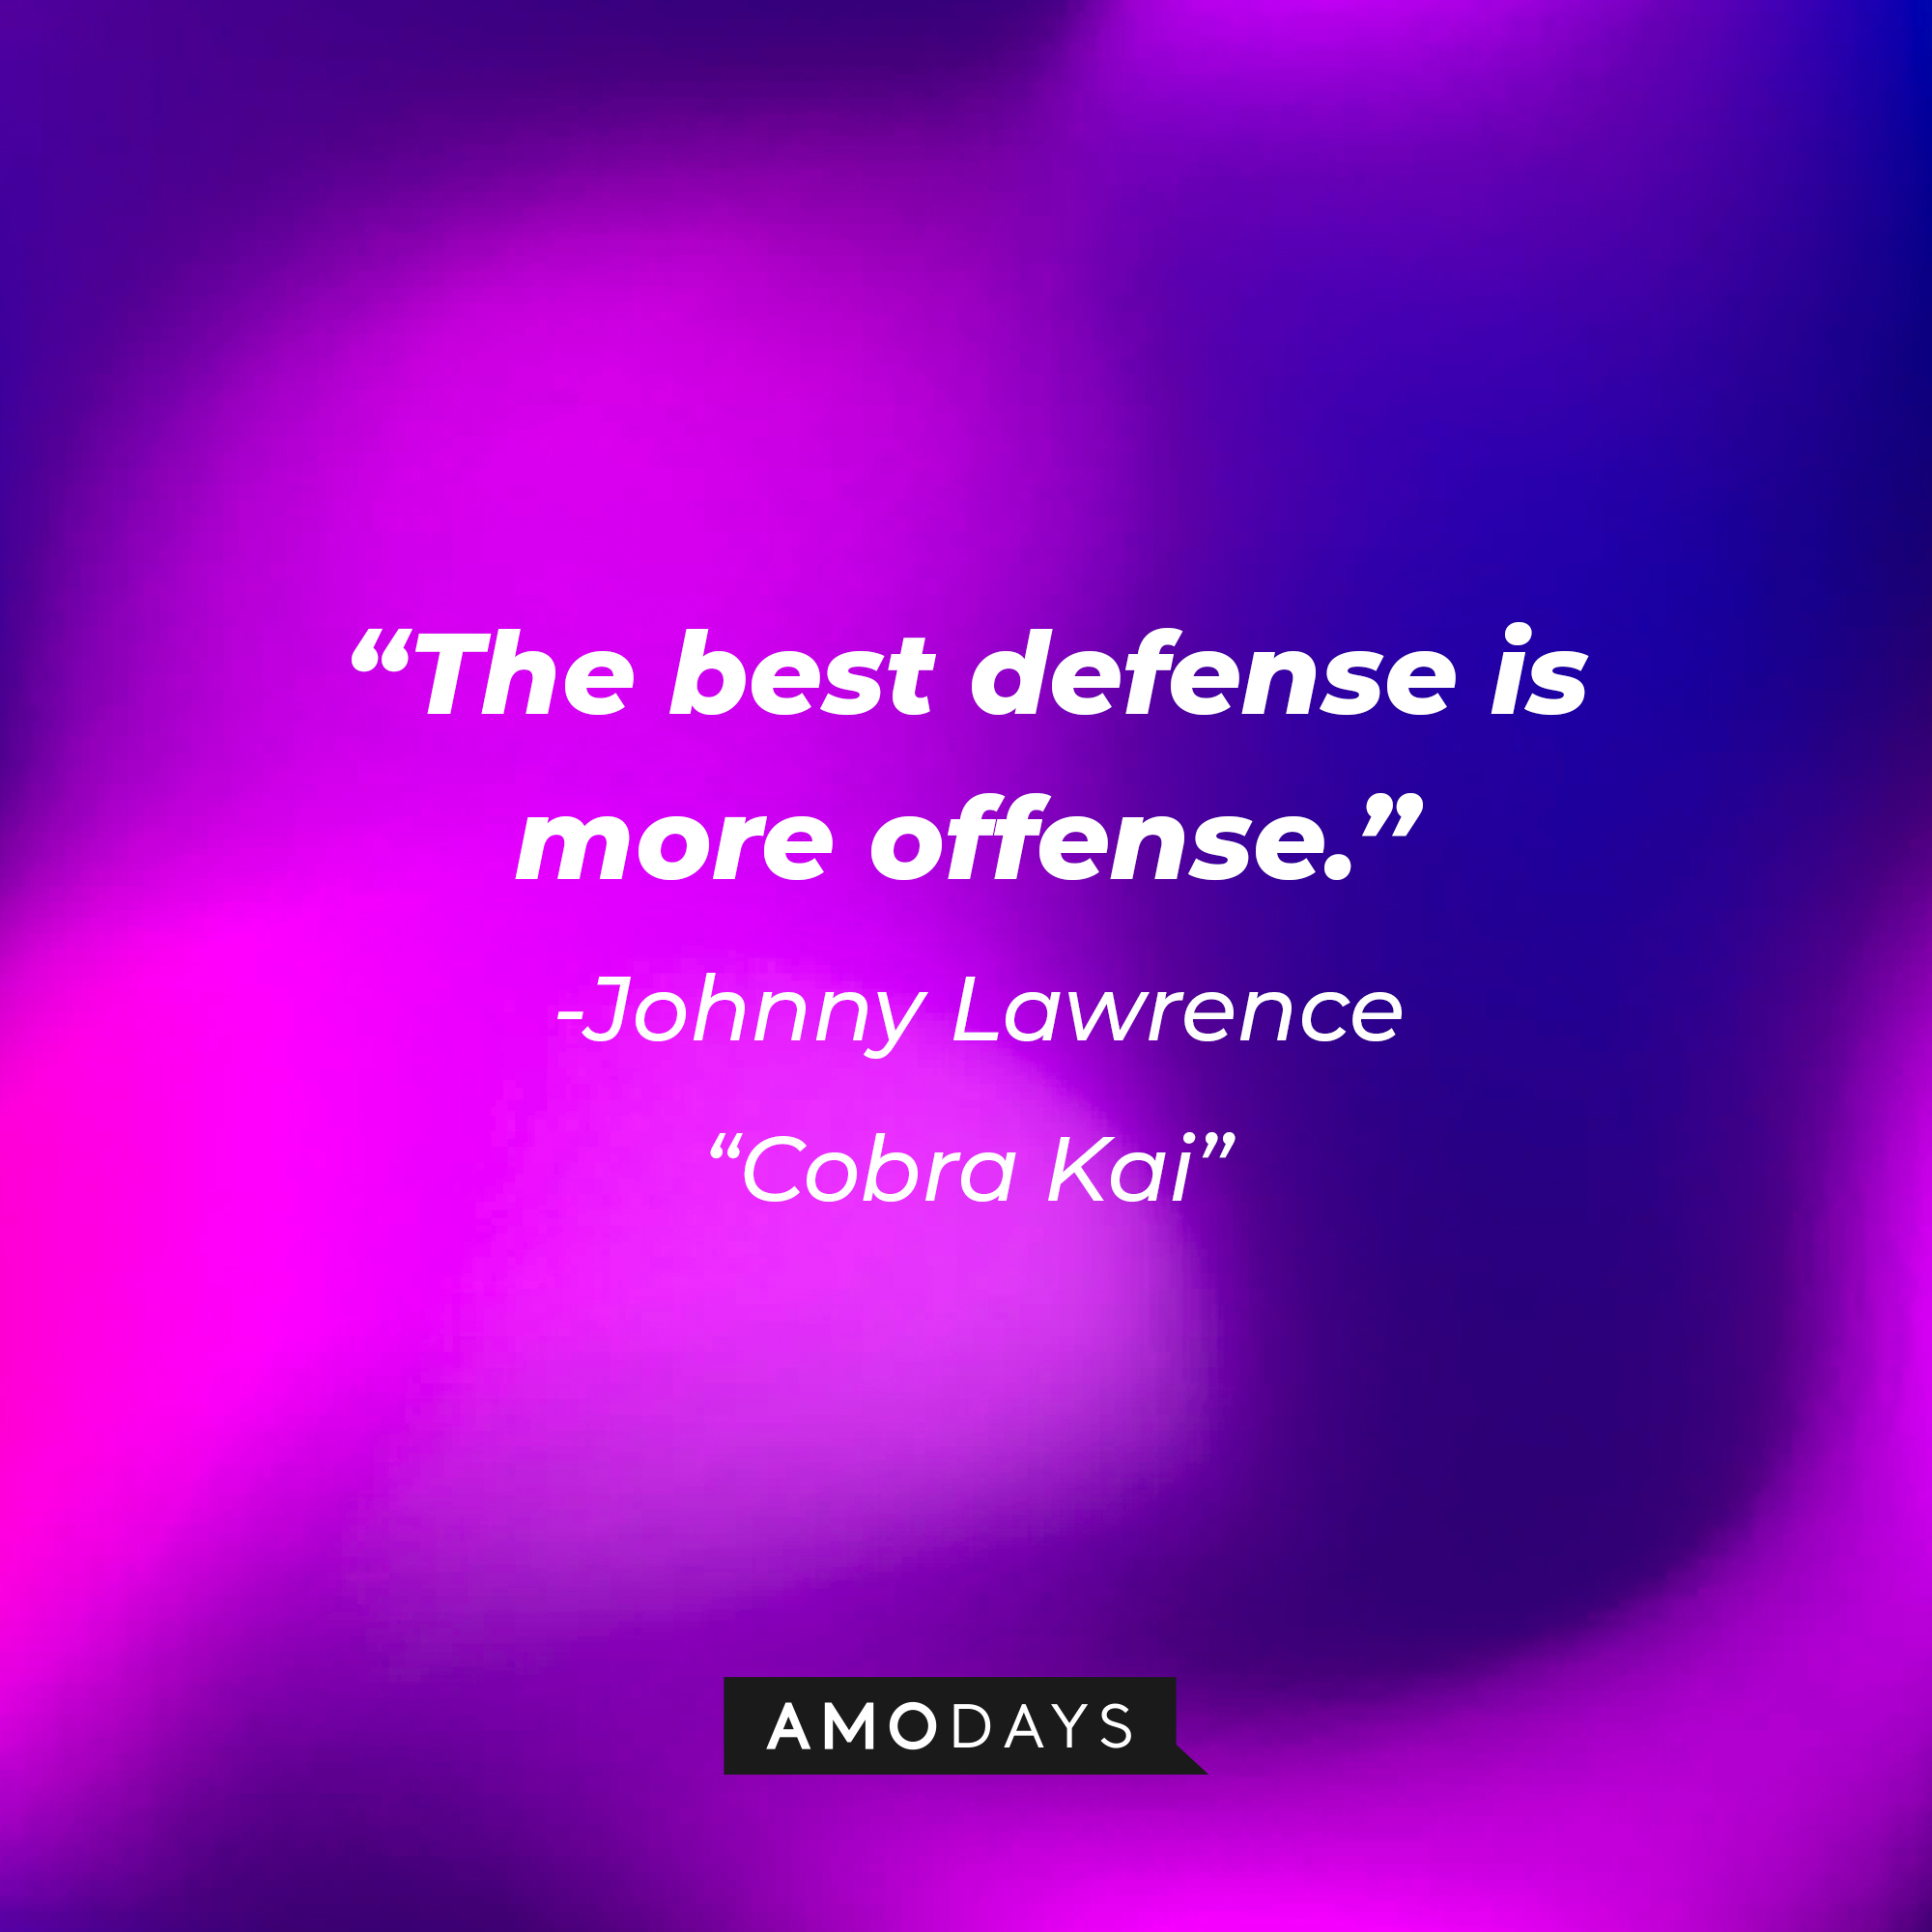 Johnny Lawrence's quote from "Cobra Kai:" "The best defense is more offense." | Source: AmoDays